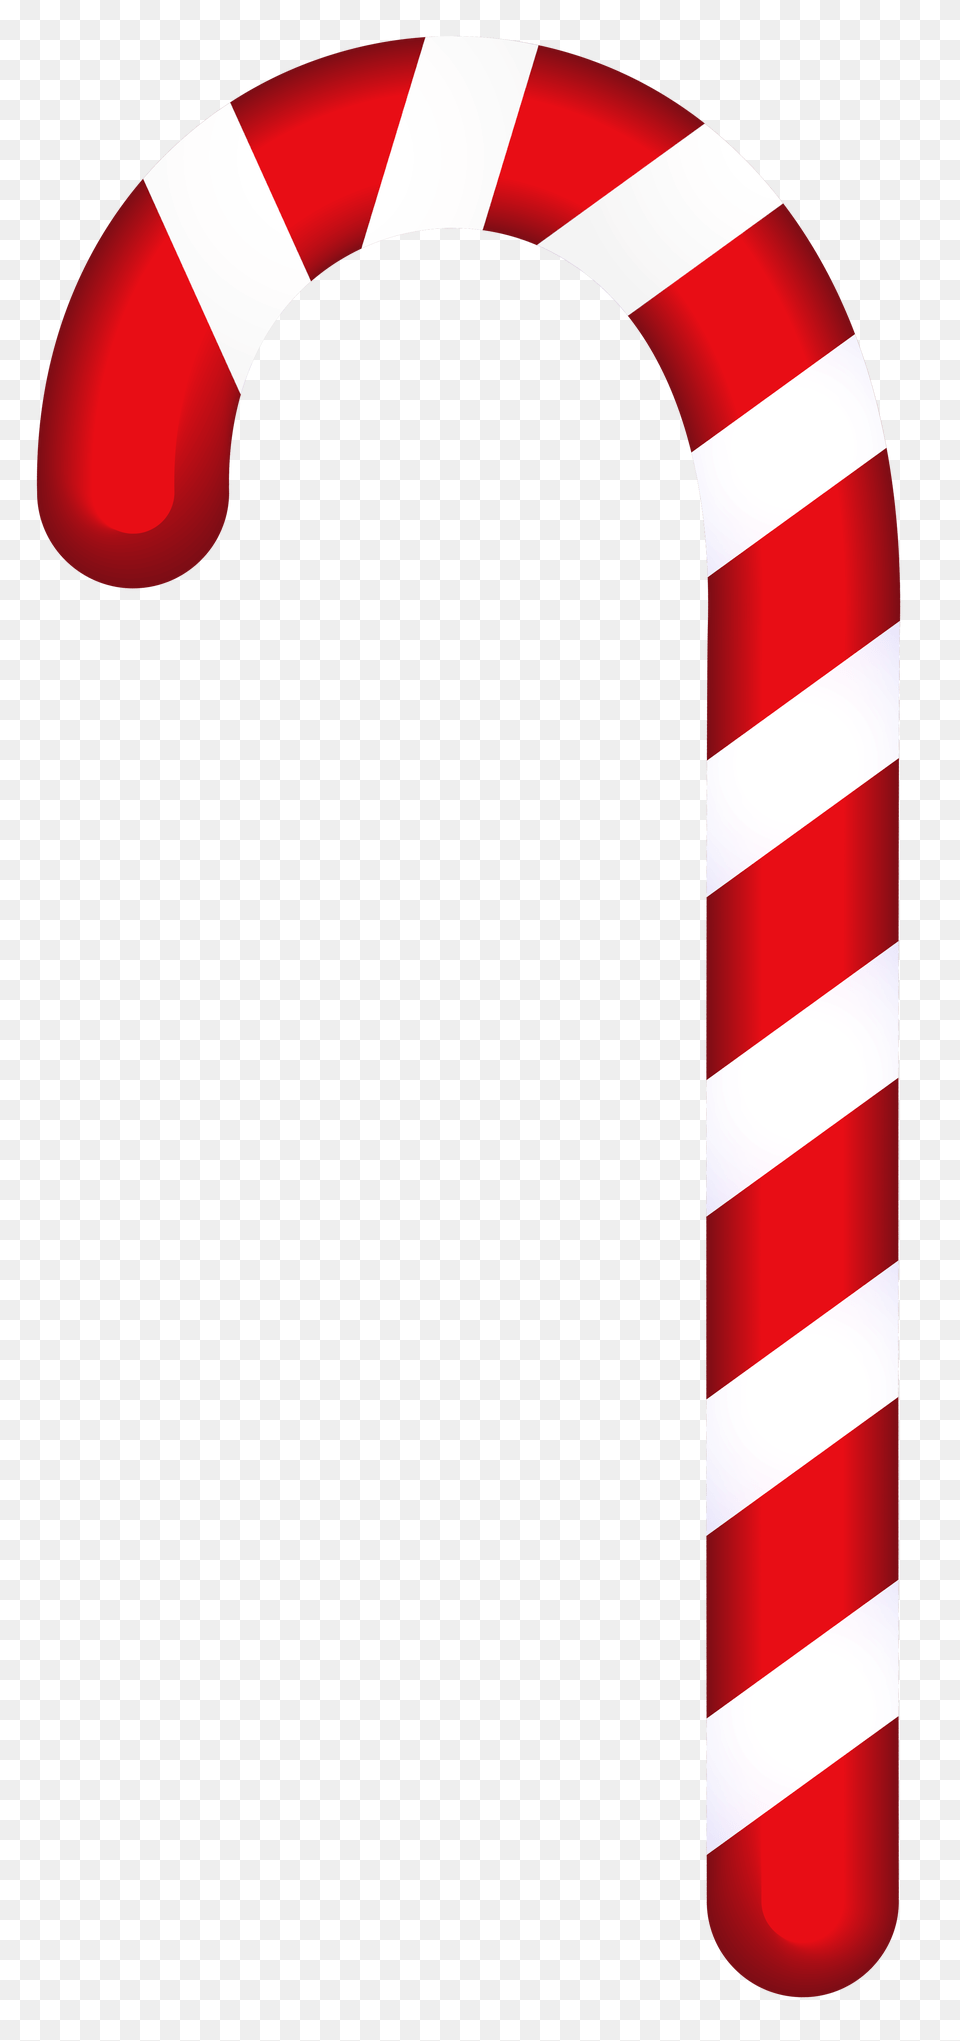 Candy Cane Clip Art, Stick, Food, Sweets, Dynamite Png Image